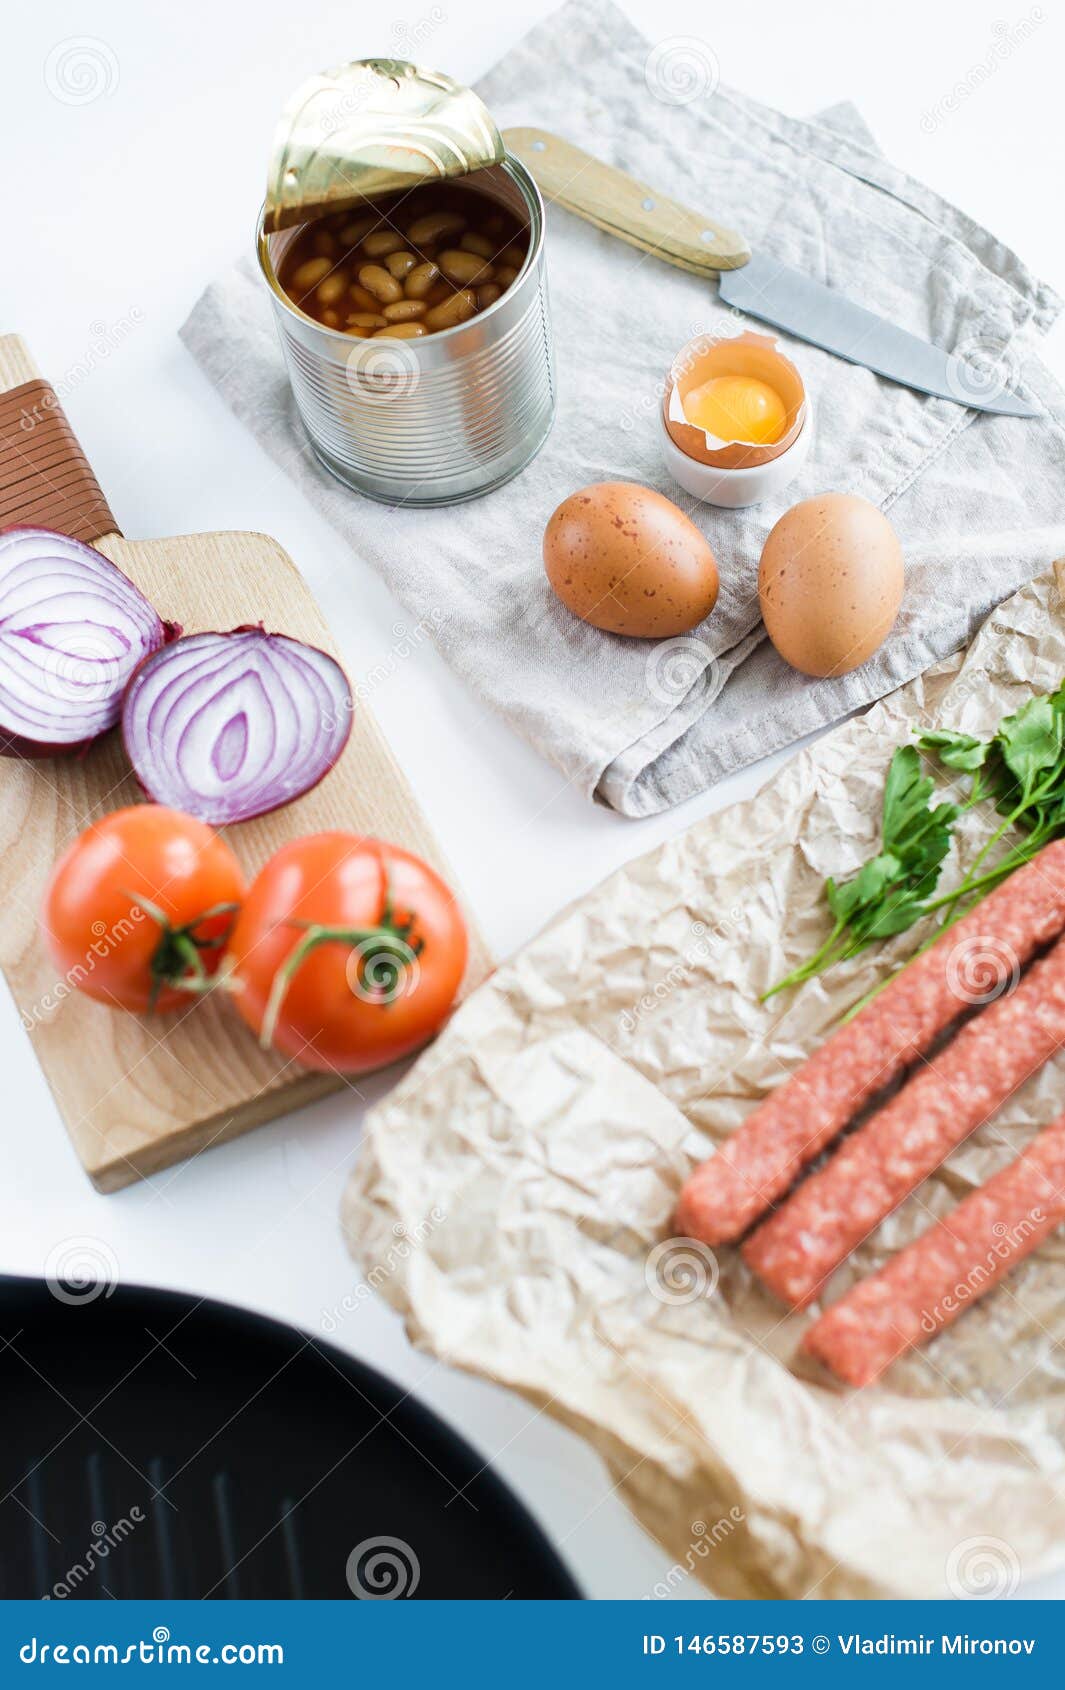 Ingredients For A Healthy Organic Breakfast  Stock Image 